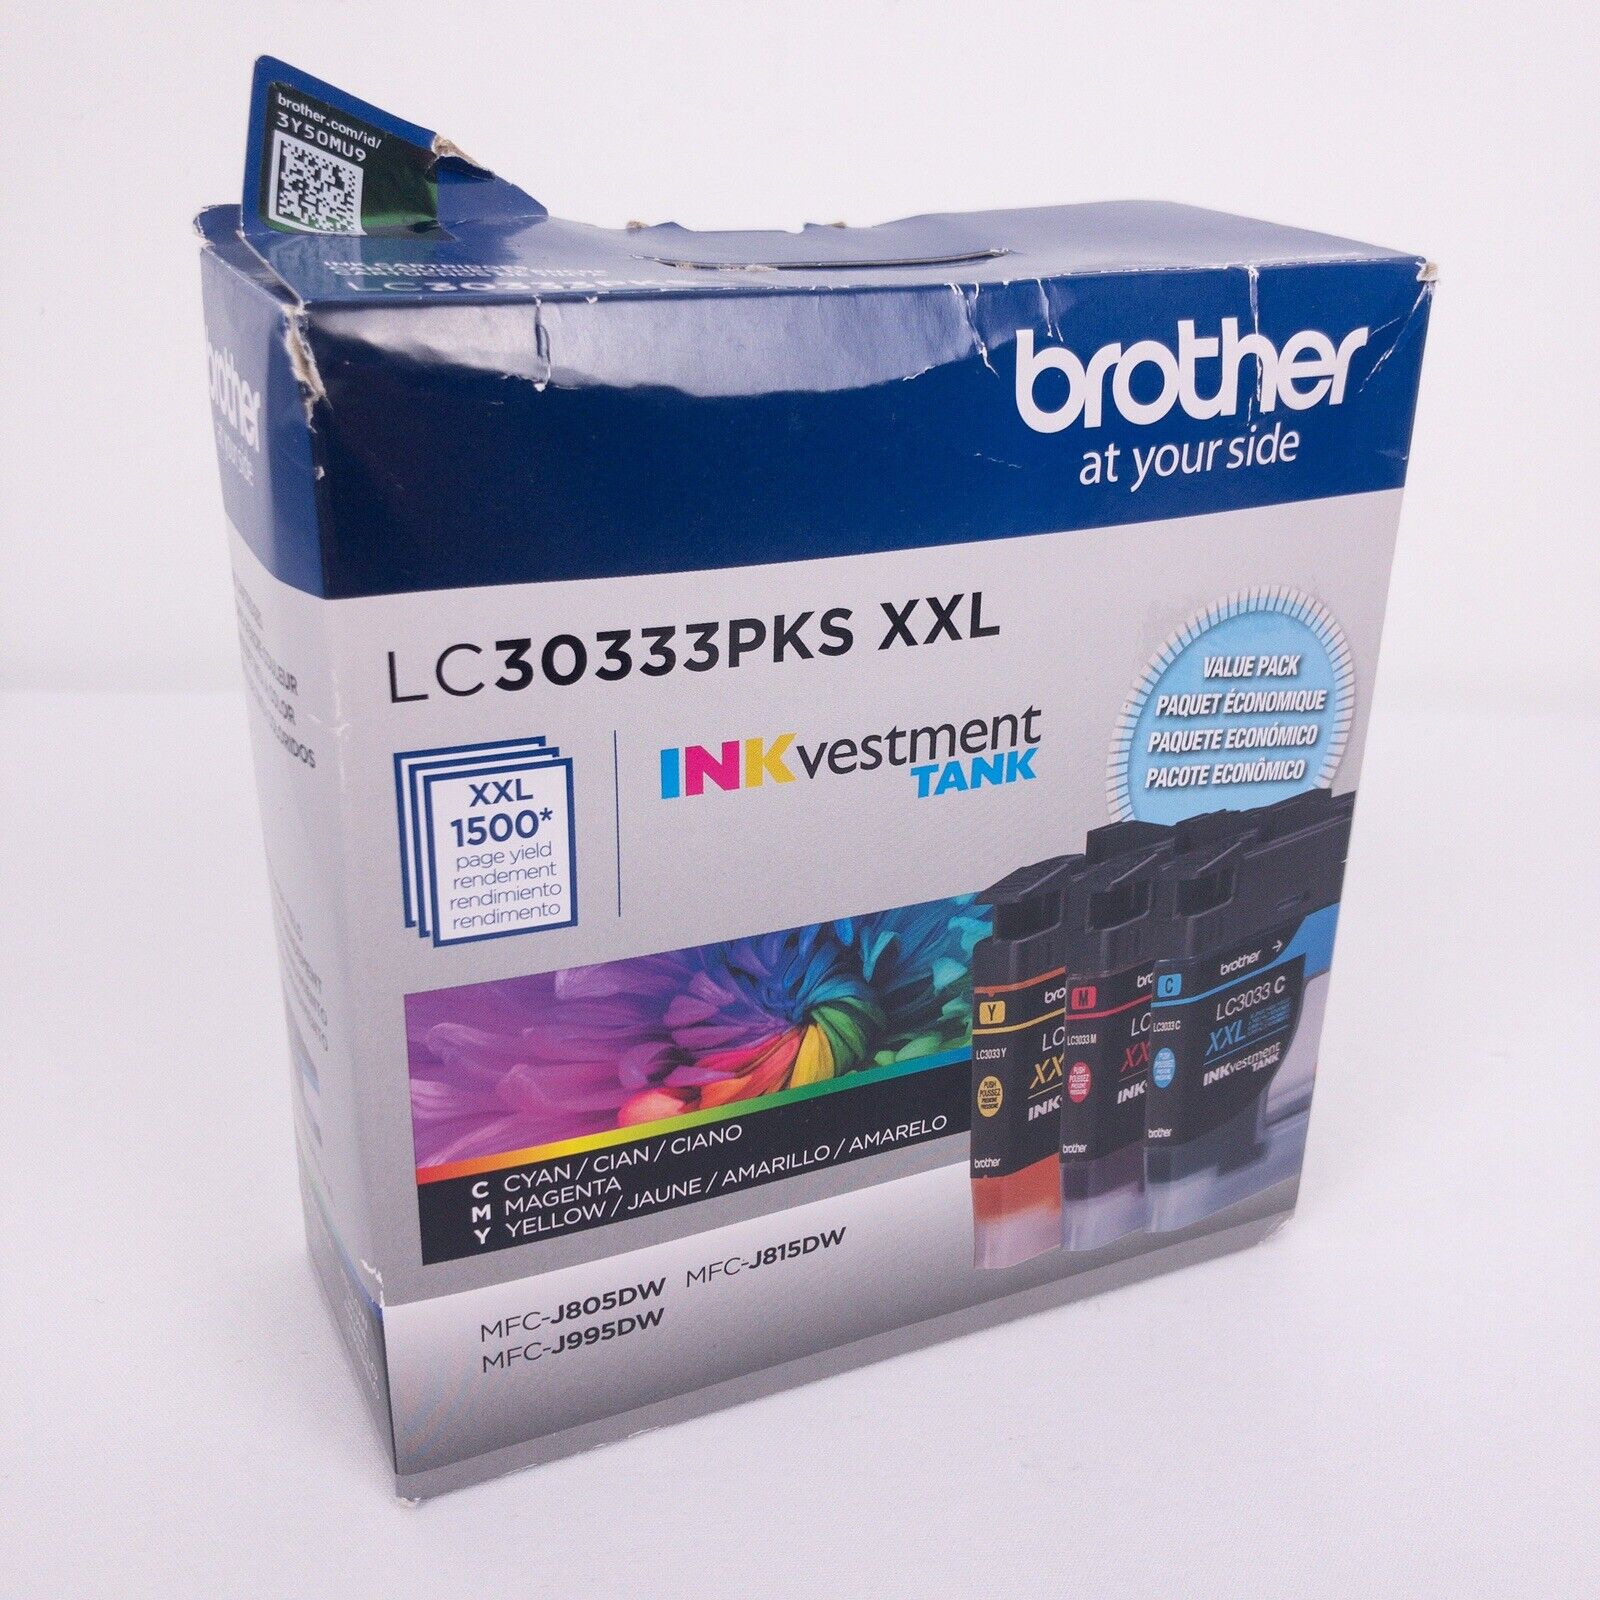 Brother LC30333PKS XXL INKvestment Tank 3 Pack Color Ink Cartridges EXP 8/2025